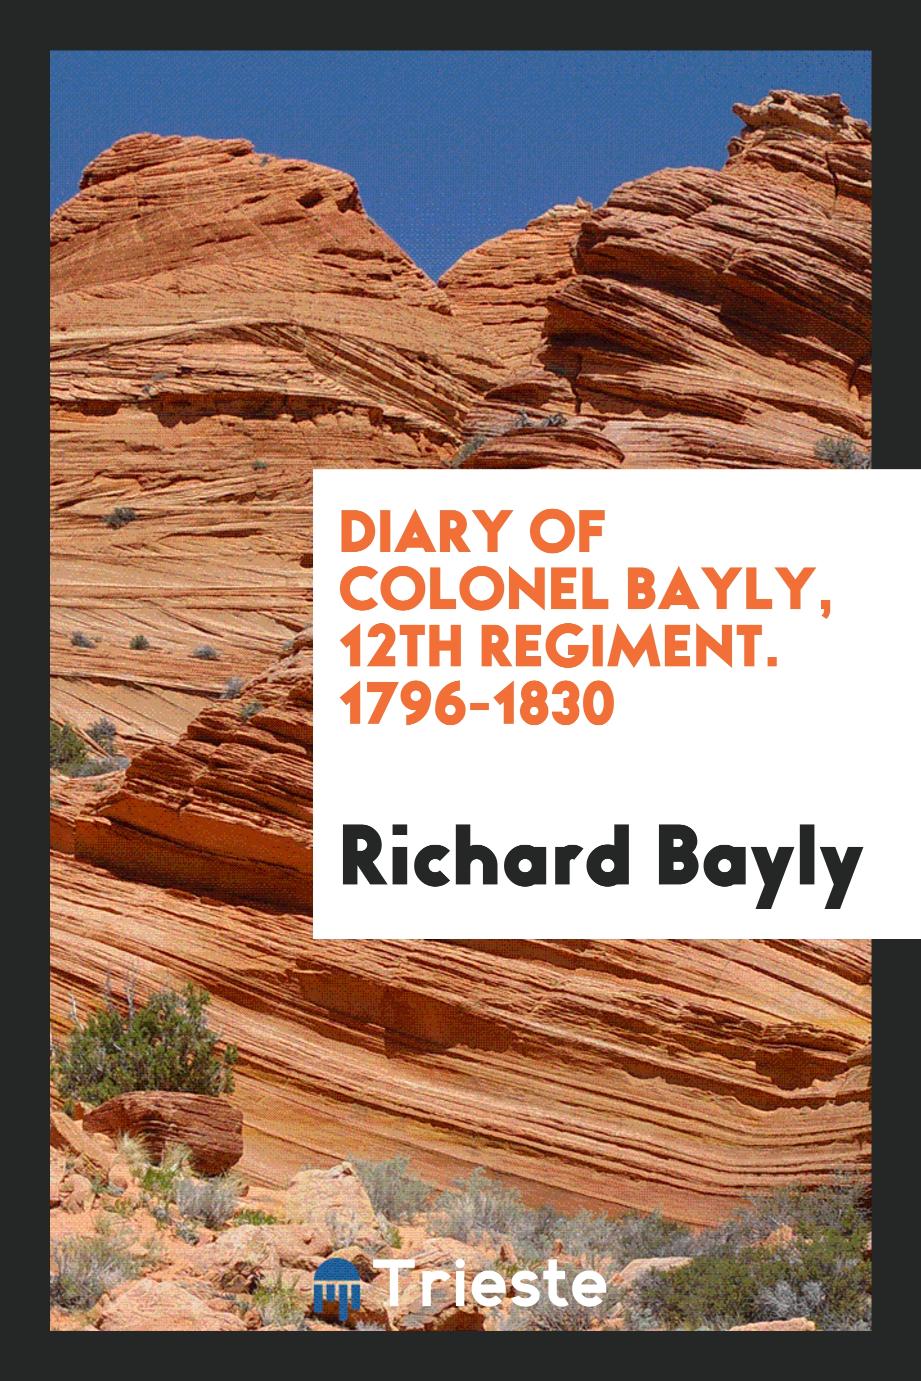 Diary of Colonel Bayly, 12th Regiment. 1796-1830